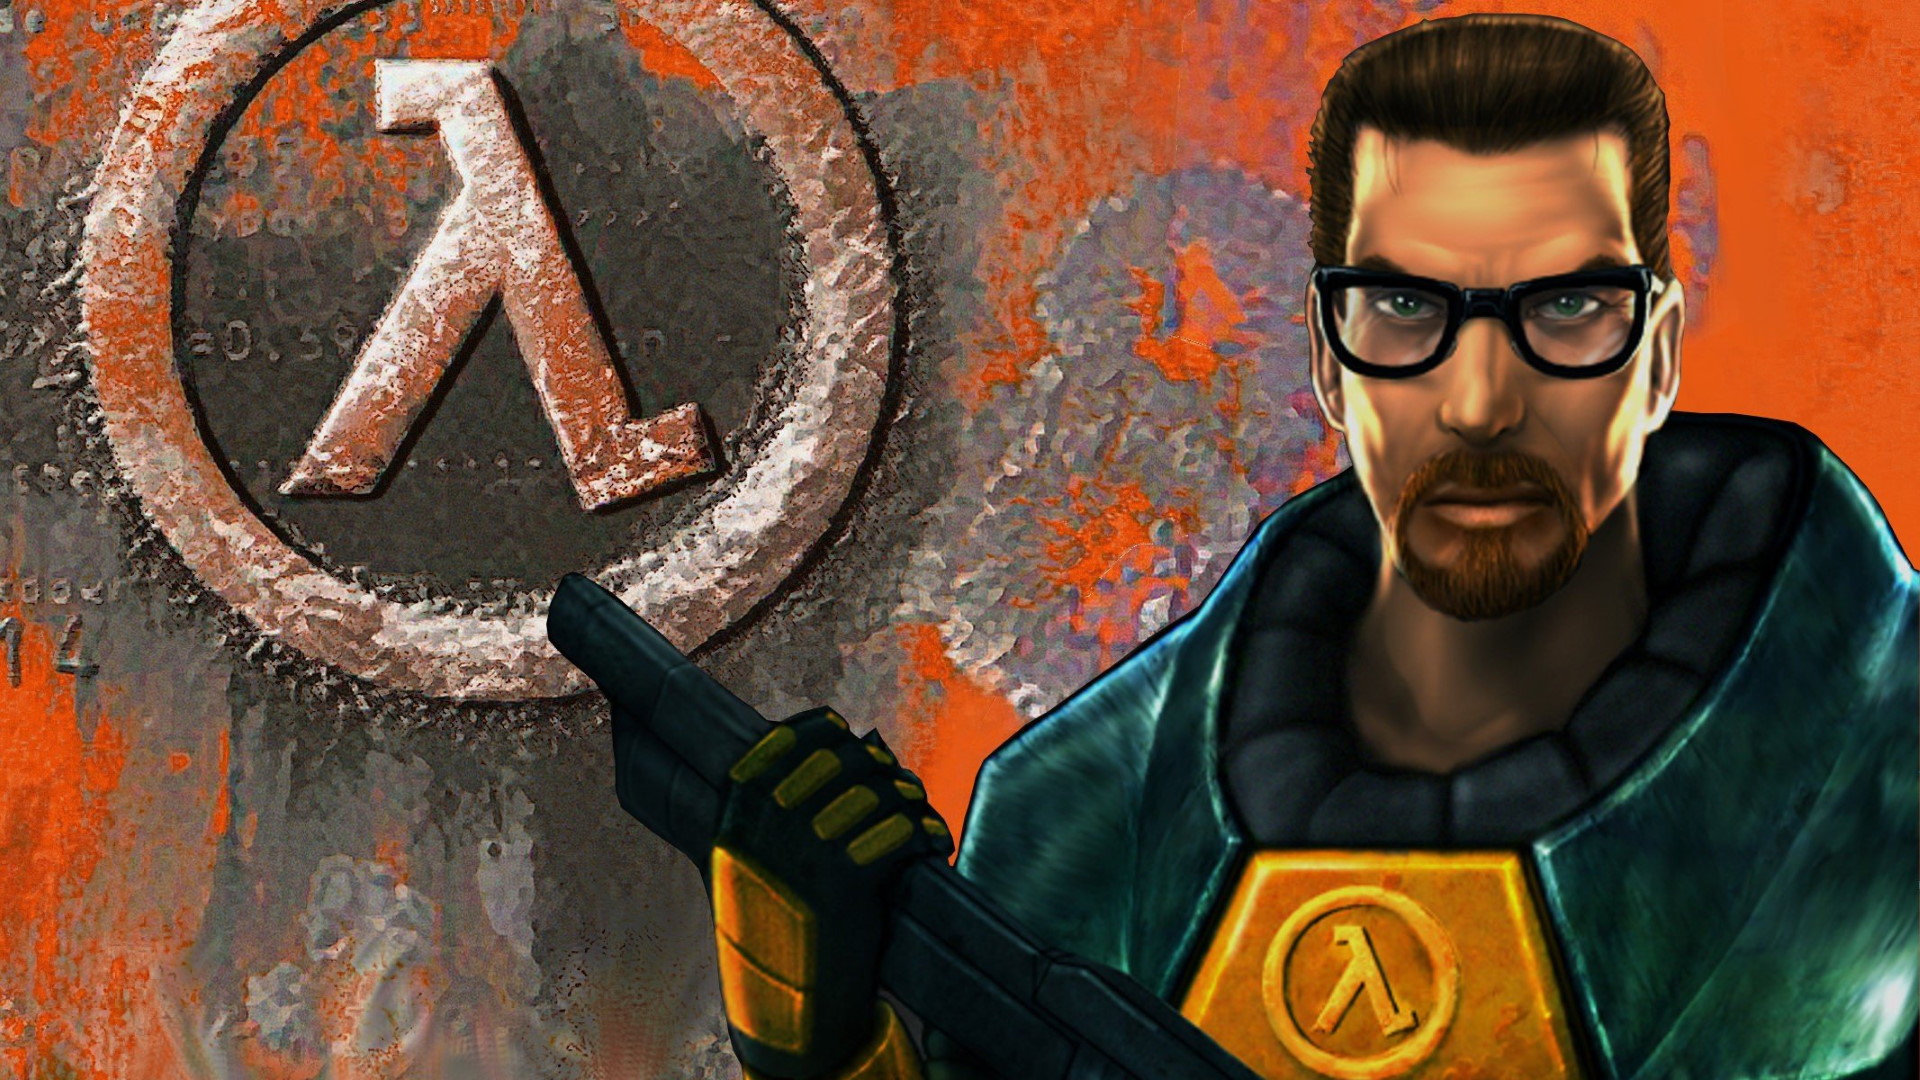  Half-Life just smashed its concurrent players record thanks to a fan campaign 